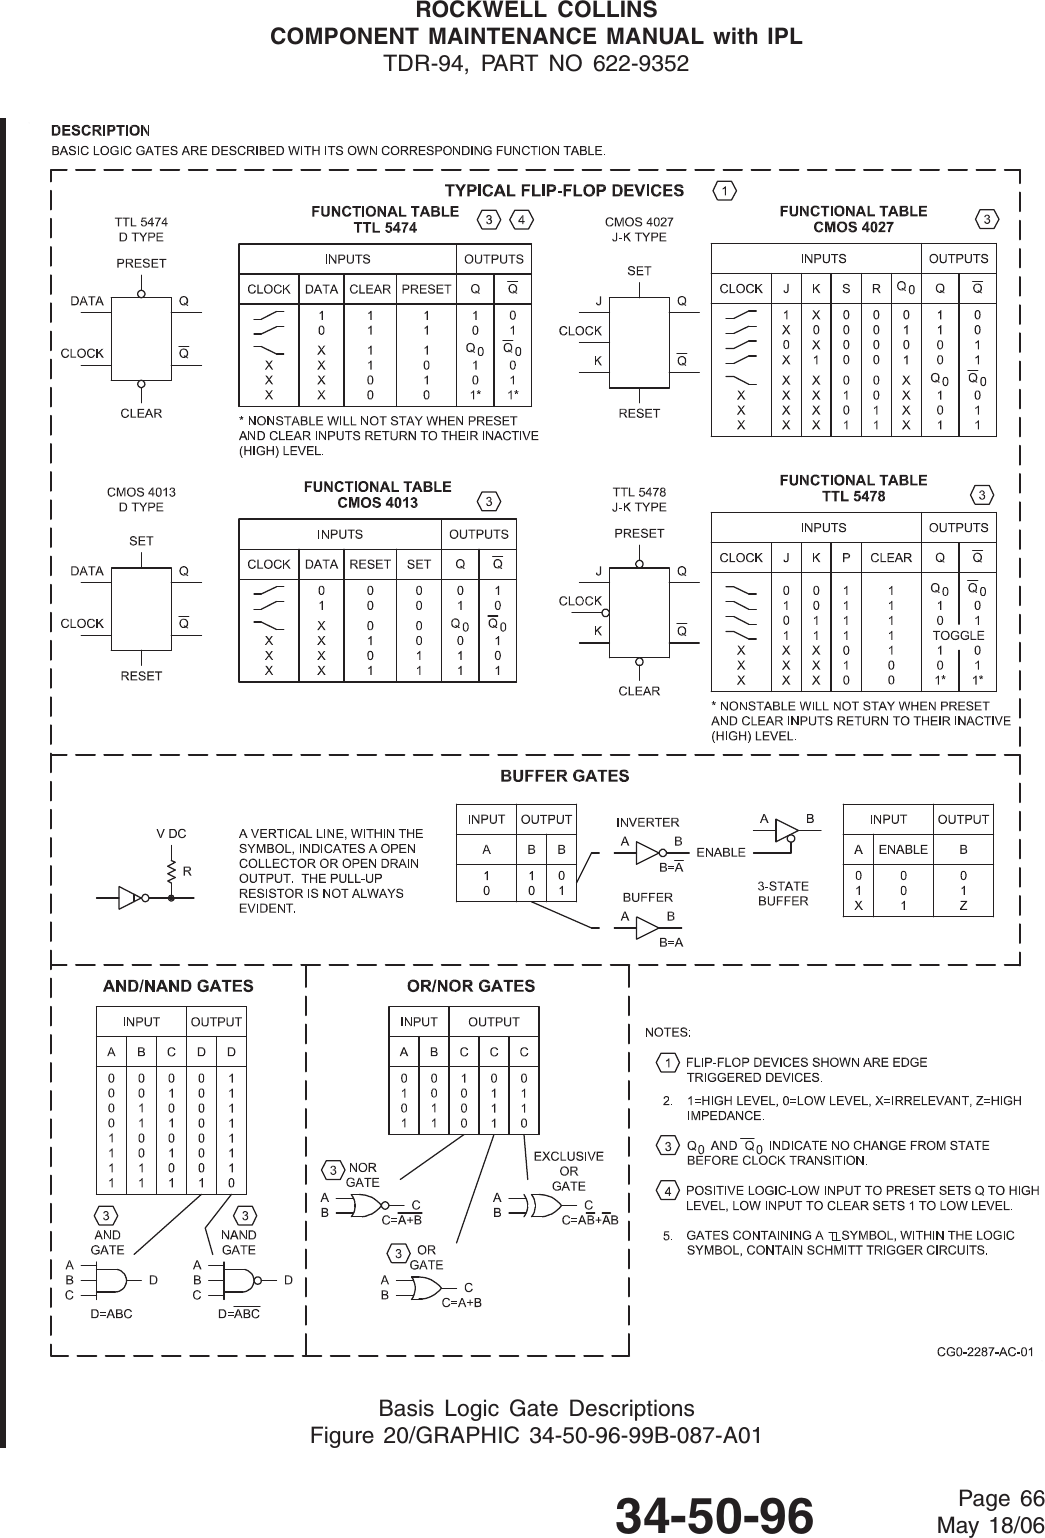 ROCKWELL COLLINSCOMPONENT MAINTENANCE MANUAL with IPLTDR-94, PART NO 622-9352Basis Logic Gate DescriptionsFigure 20/GRAPHIC 34-50-96-99B-087-A0134-50-96 Page 66May 18/06